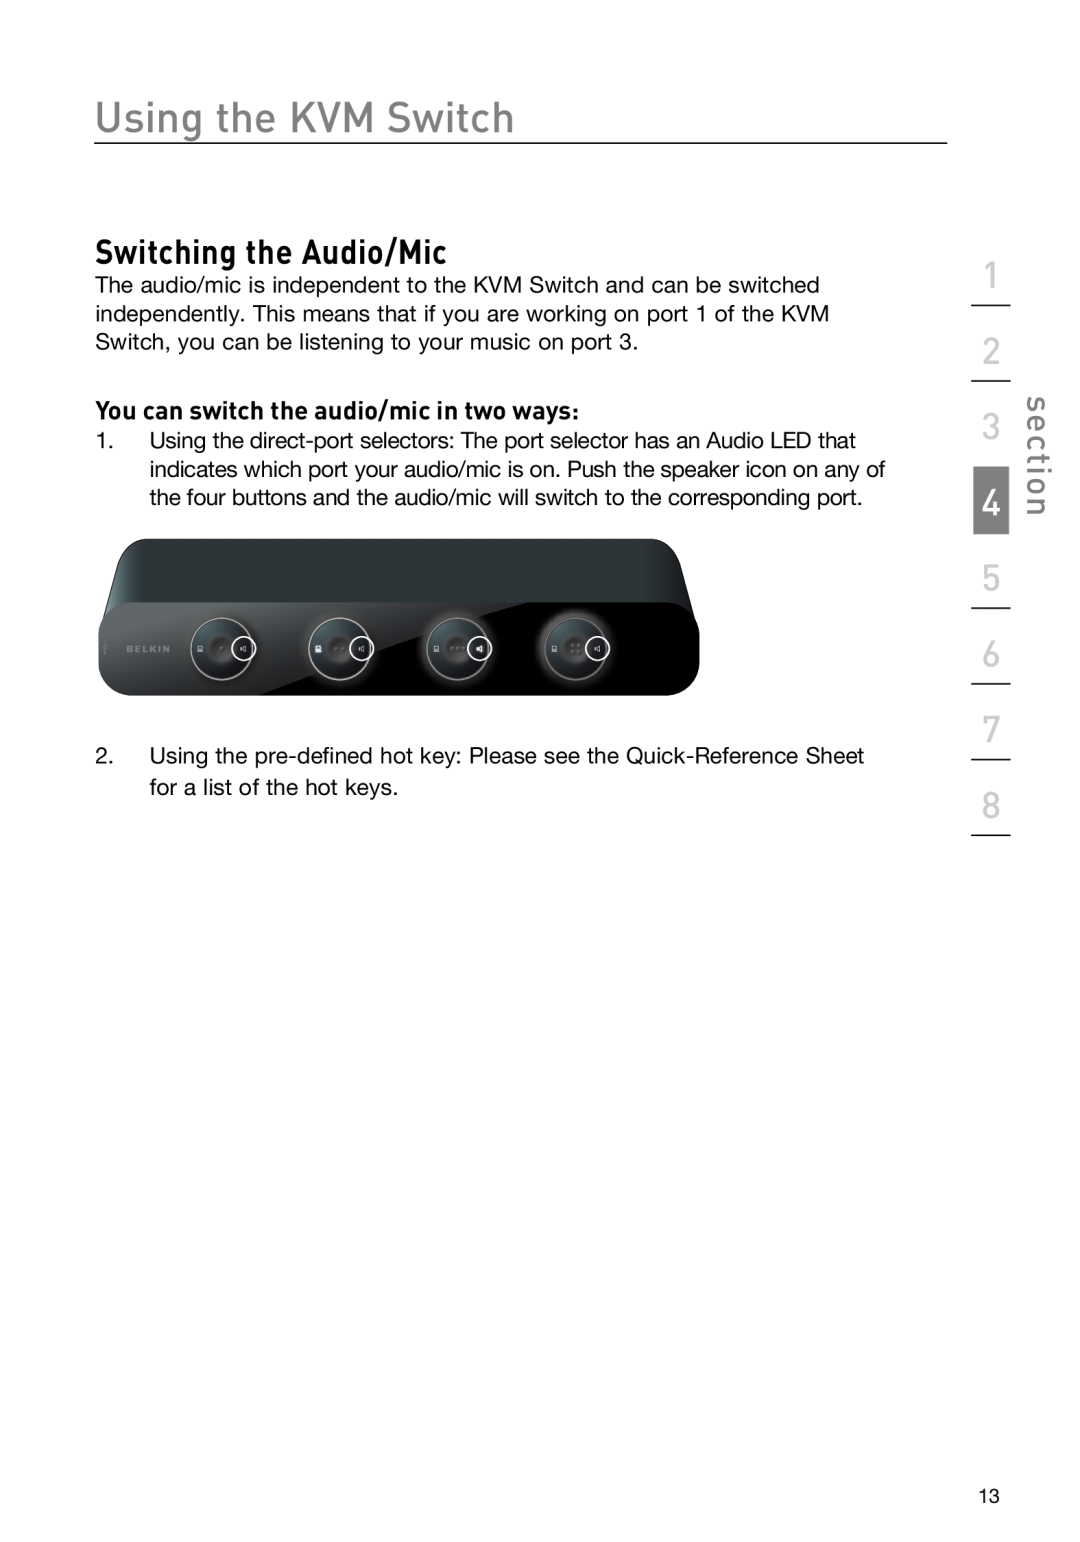 Belkin F1DD102LEA manual Switching the Audio/Mic, You can switch the audio/mic in two ways, Using the KVM Switch, section 